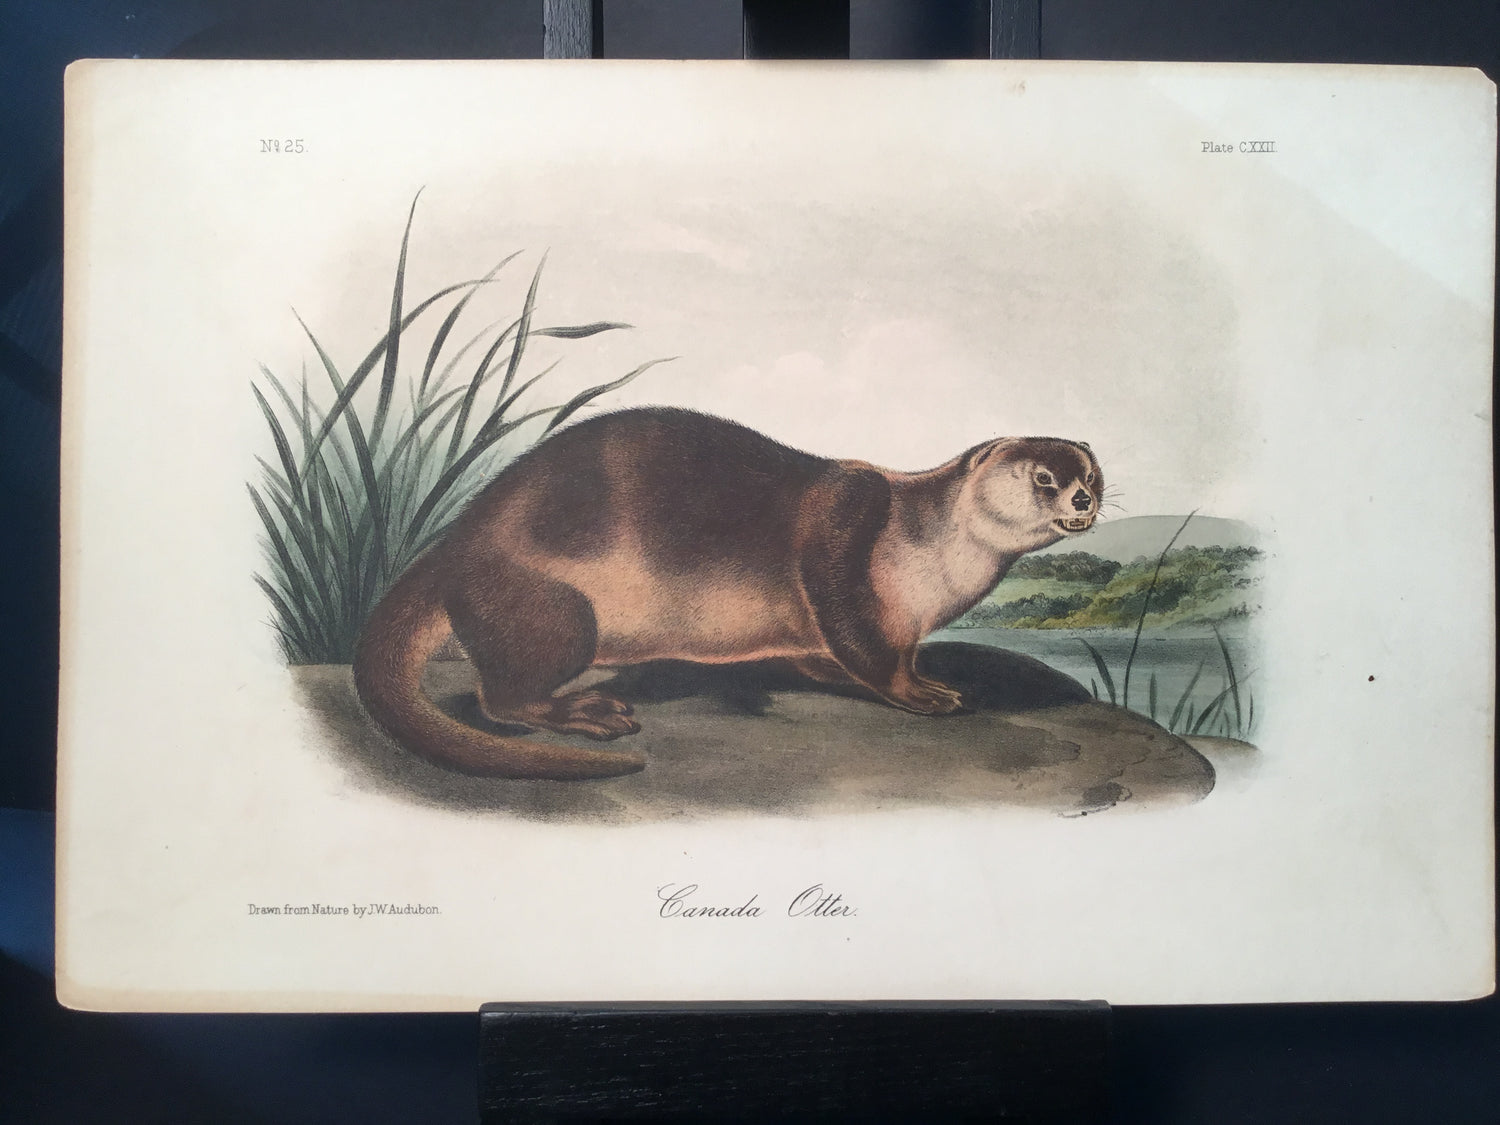 Lord-Hopkins Collection - Canada Otter